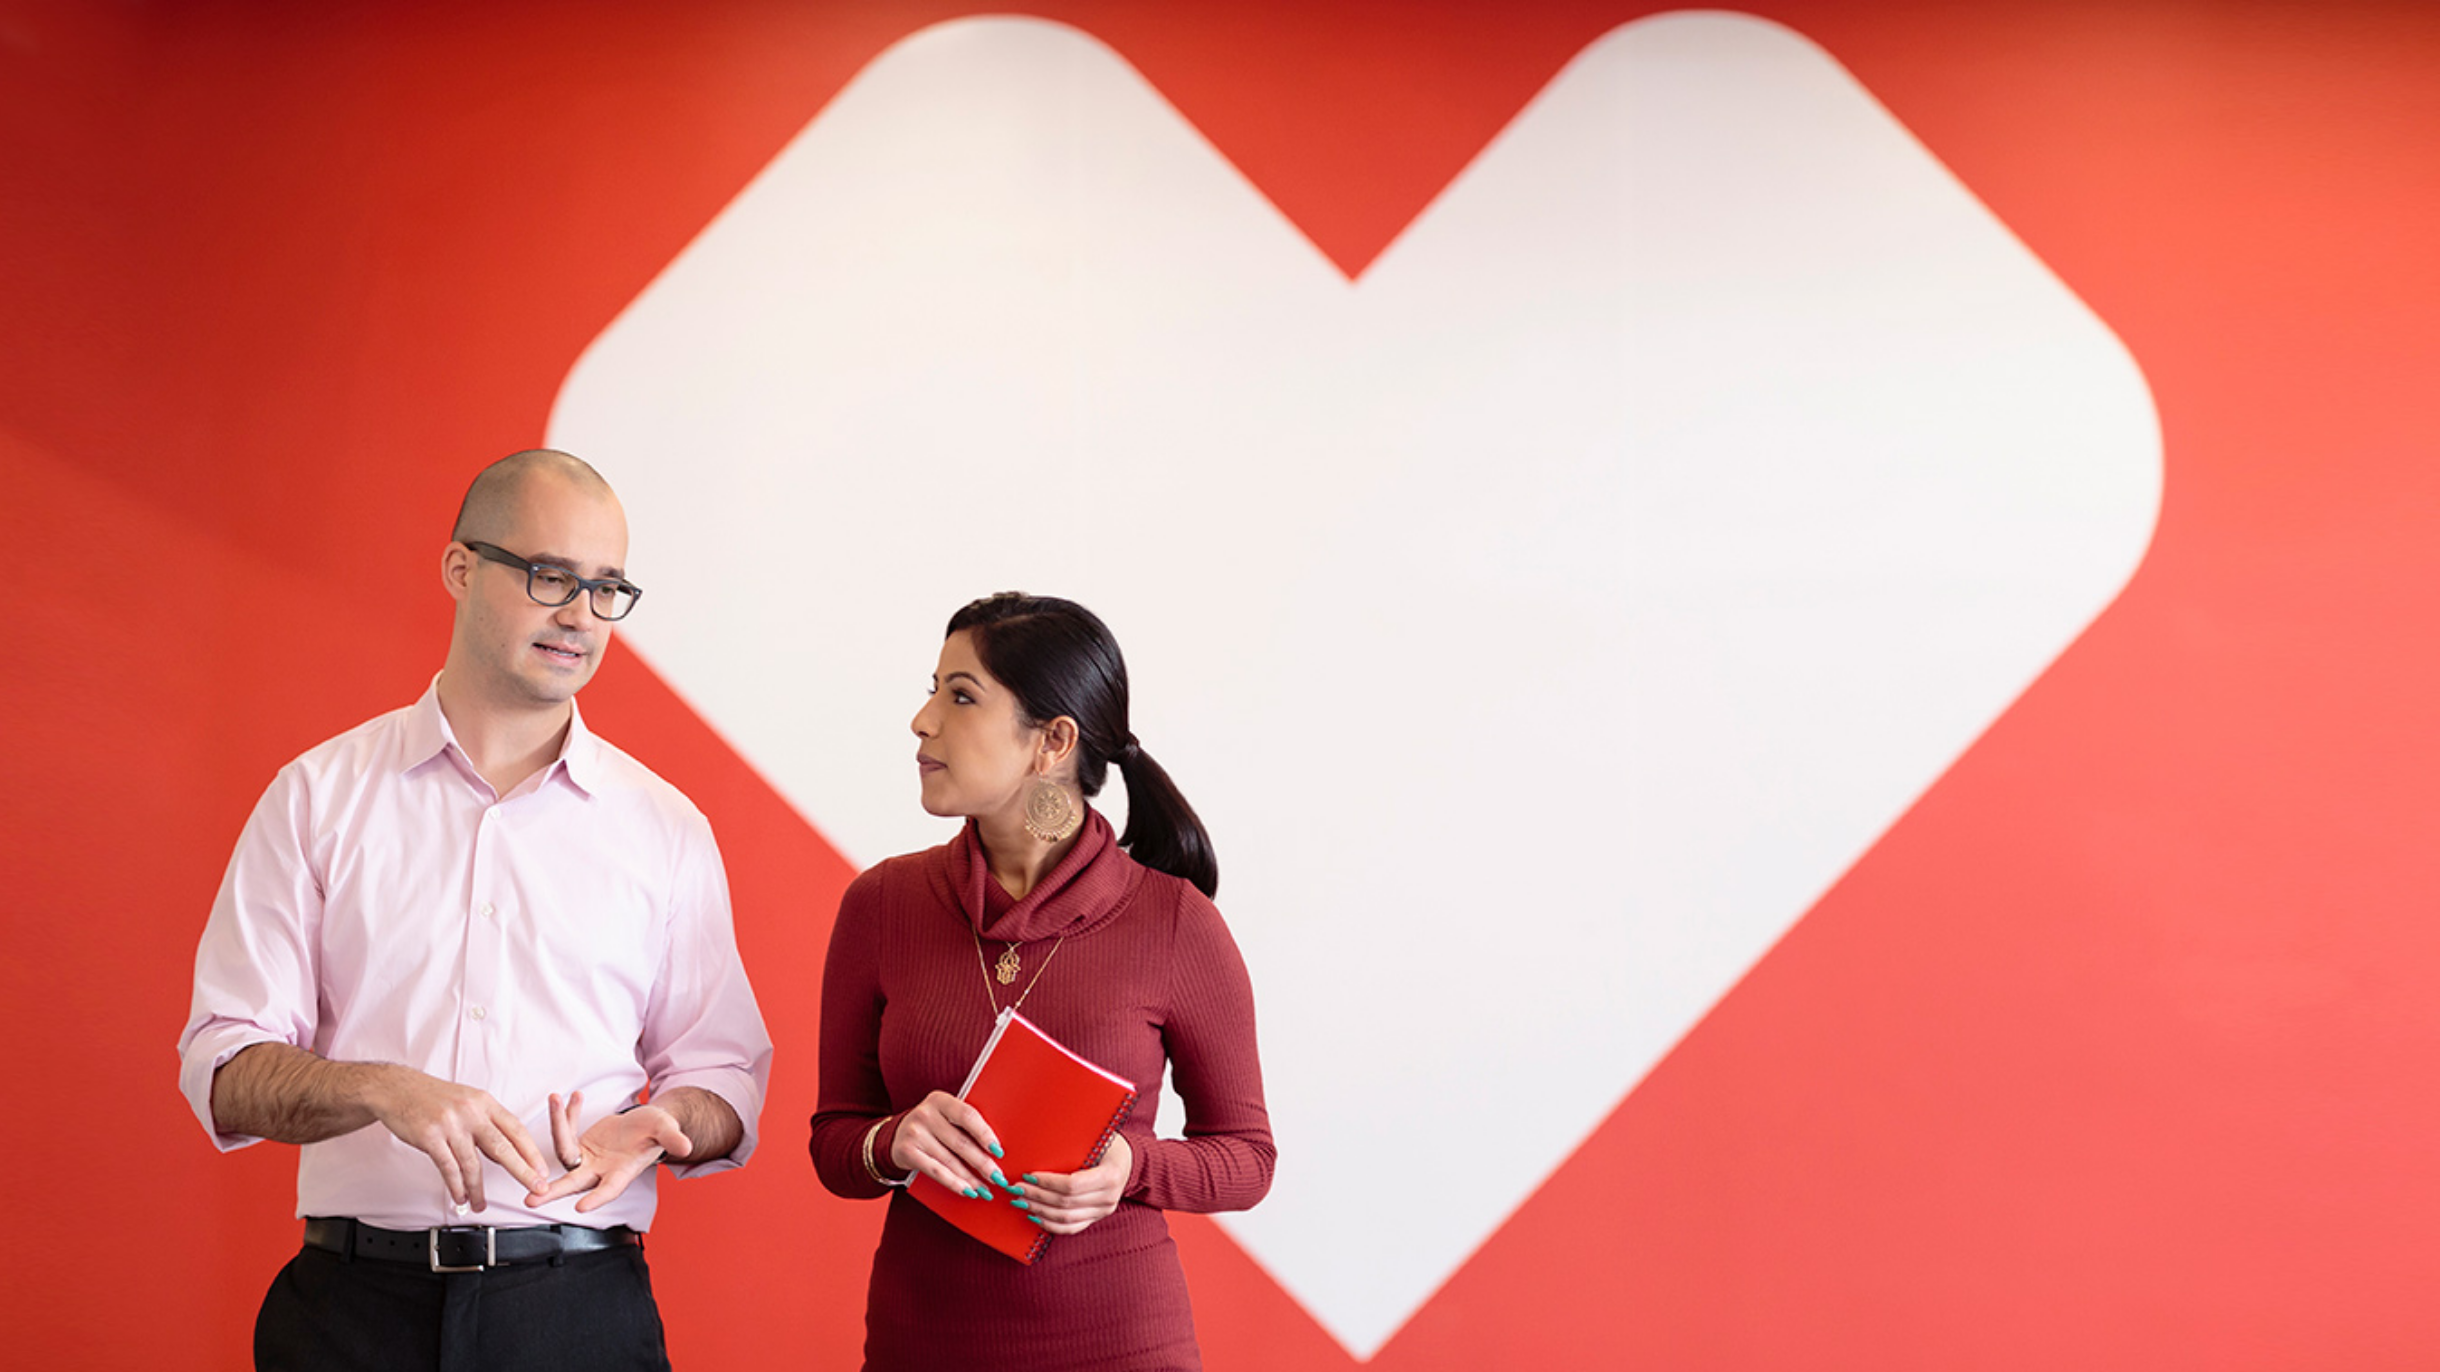 CVS colleagues in front of a white heart logo